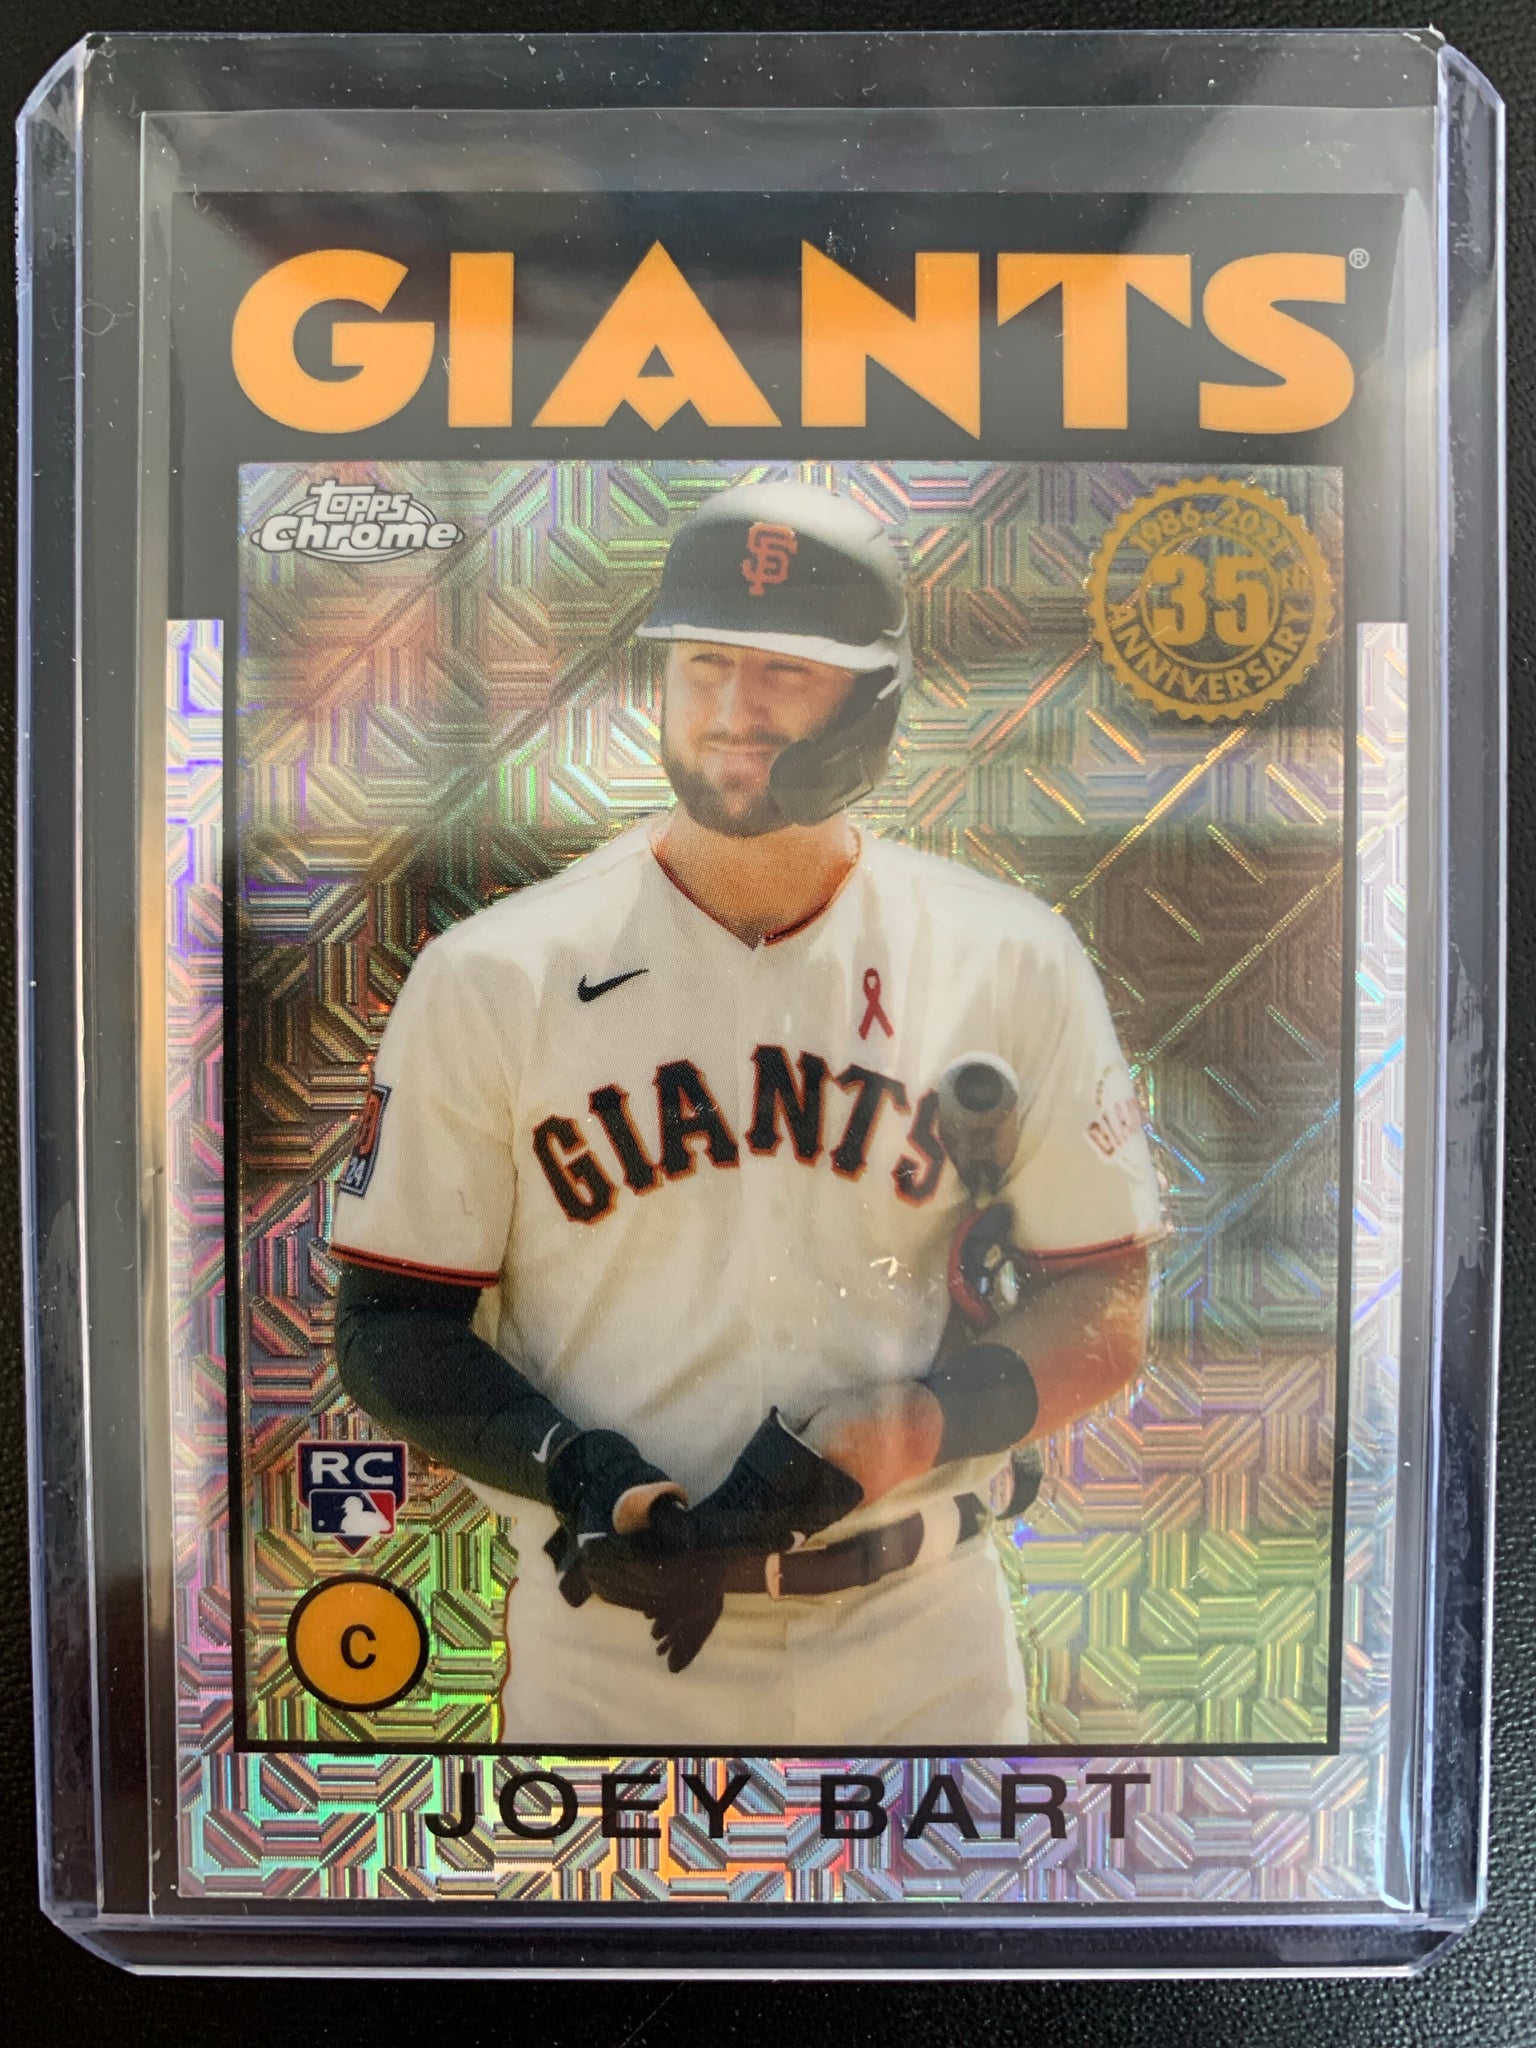 2021 TOPPS SERIES 1 BASEBALL #86BC-91 SAN FRANCISCO GIANTS - JOEY BART 86 TOPPS SILVER PACK CHROME REFRACTOR ROOKIE CARD